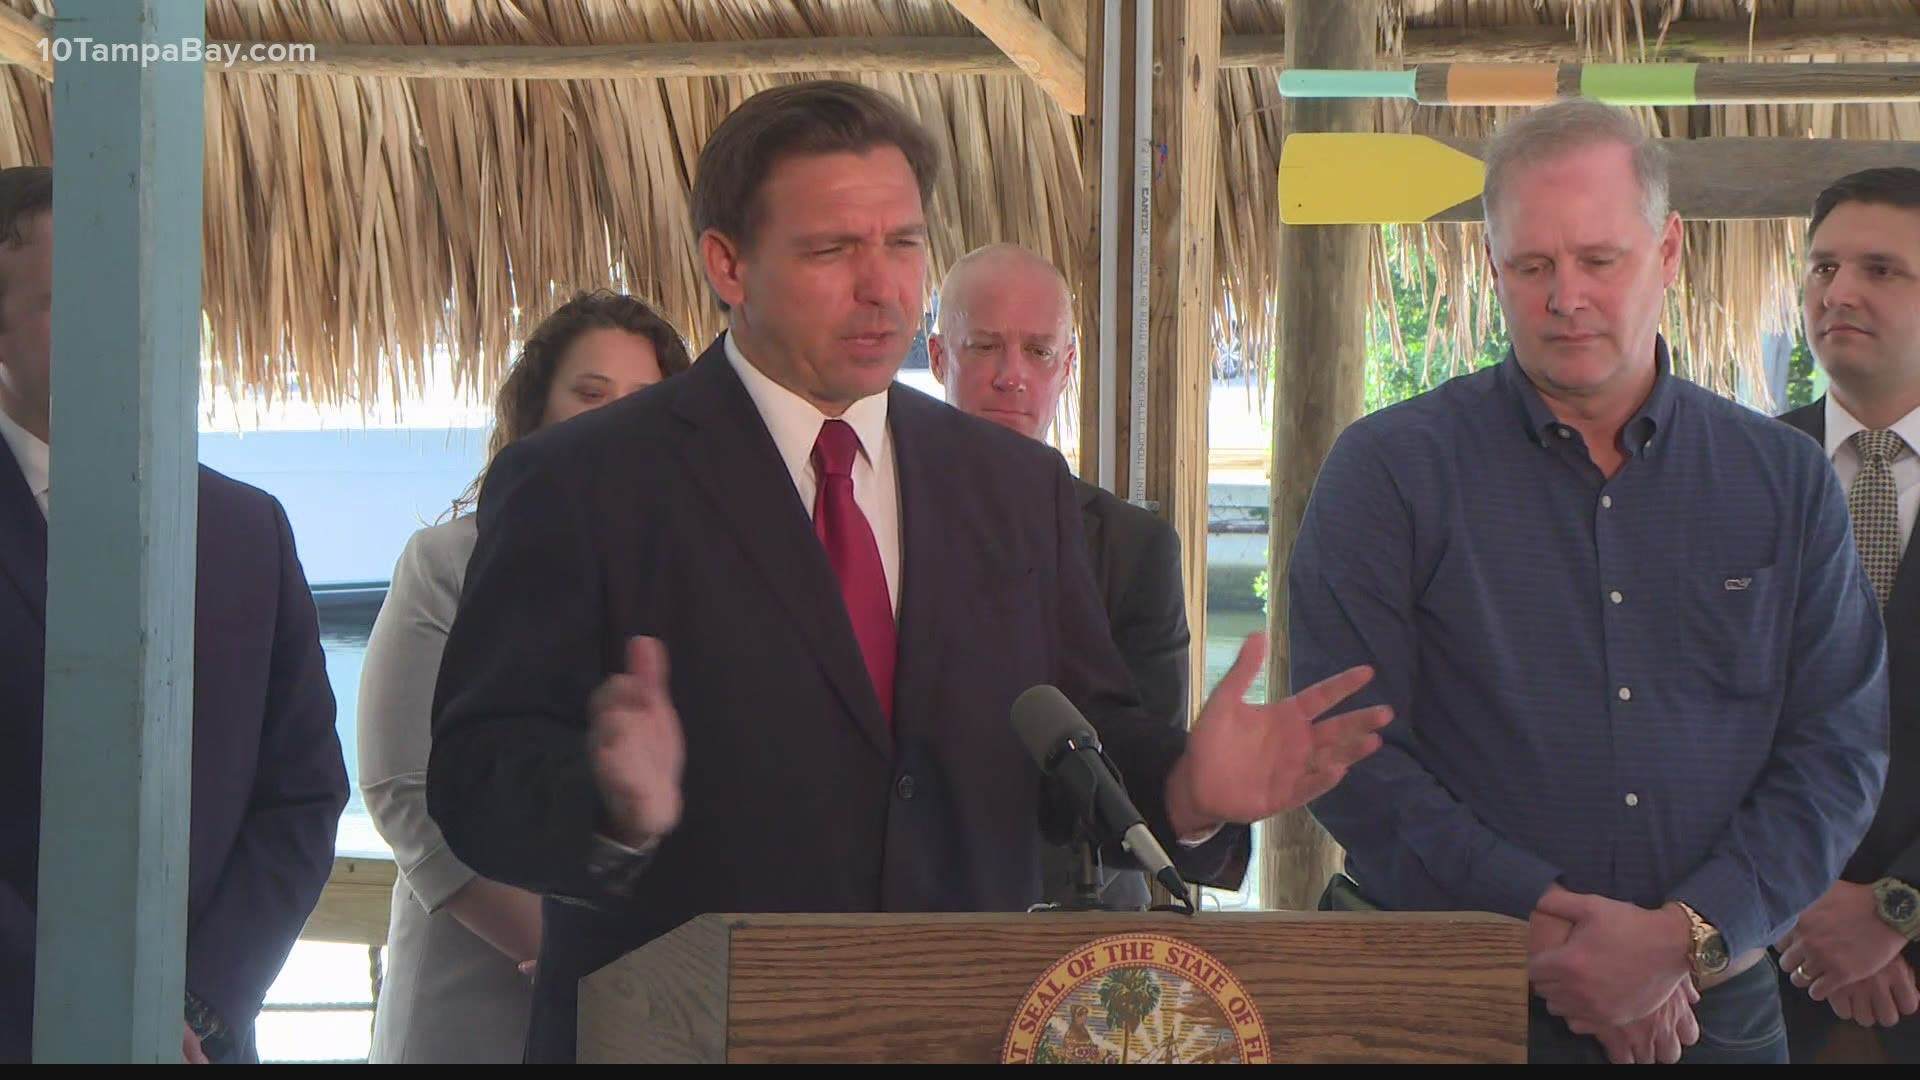 DeSantis cited the amount of Floridians vaccinated, the surplus of doses in the state and his want for people in the state to live freely.